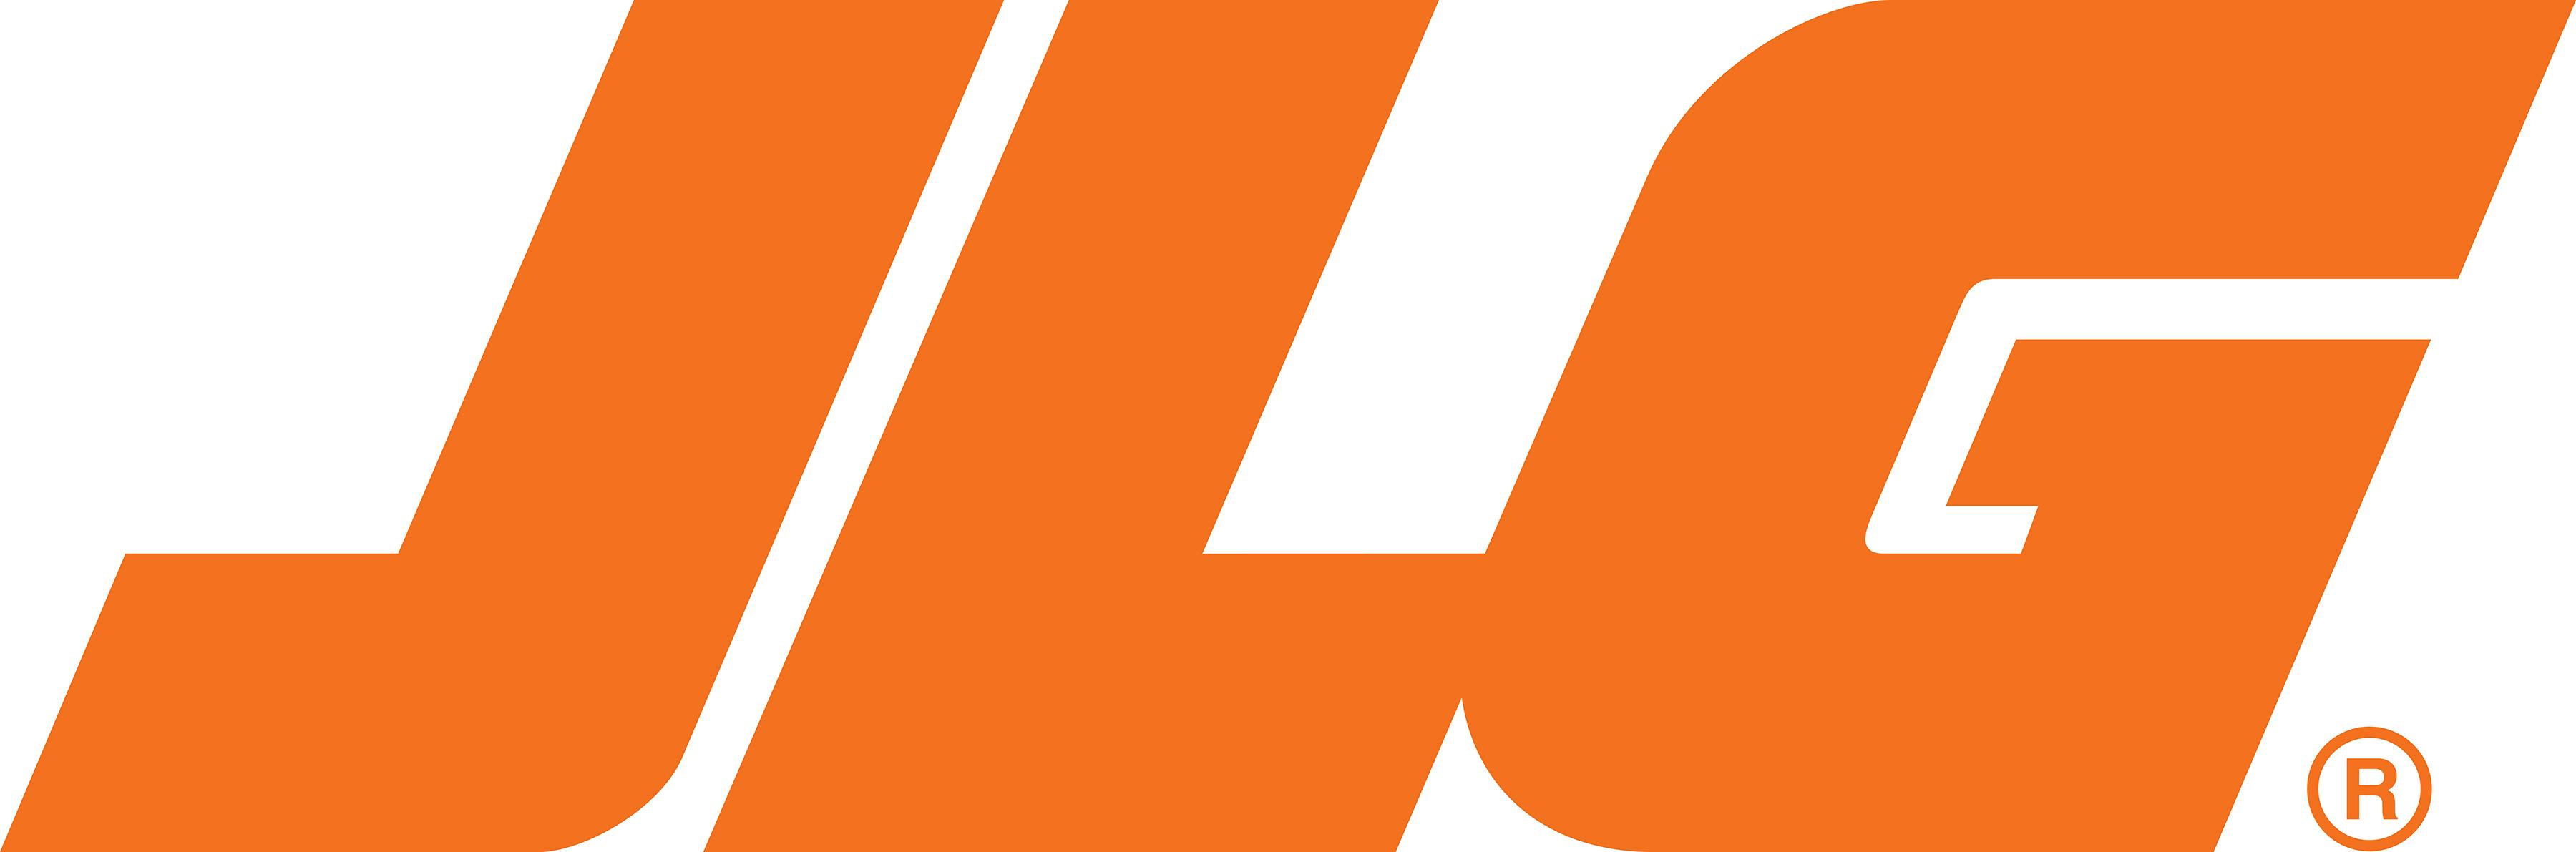 JLG Partners with XPO Logistics for Aftermarket Parts Distribution | Construction News